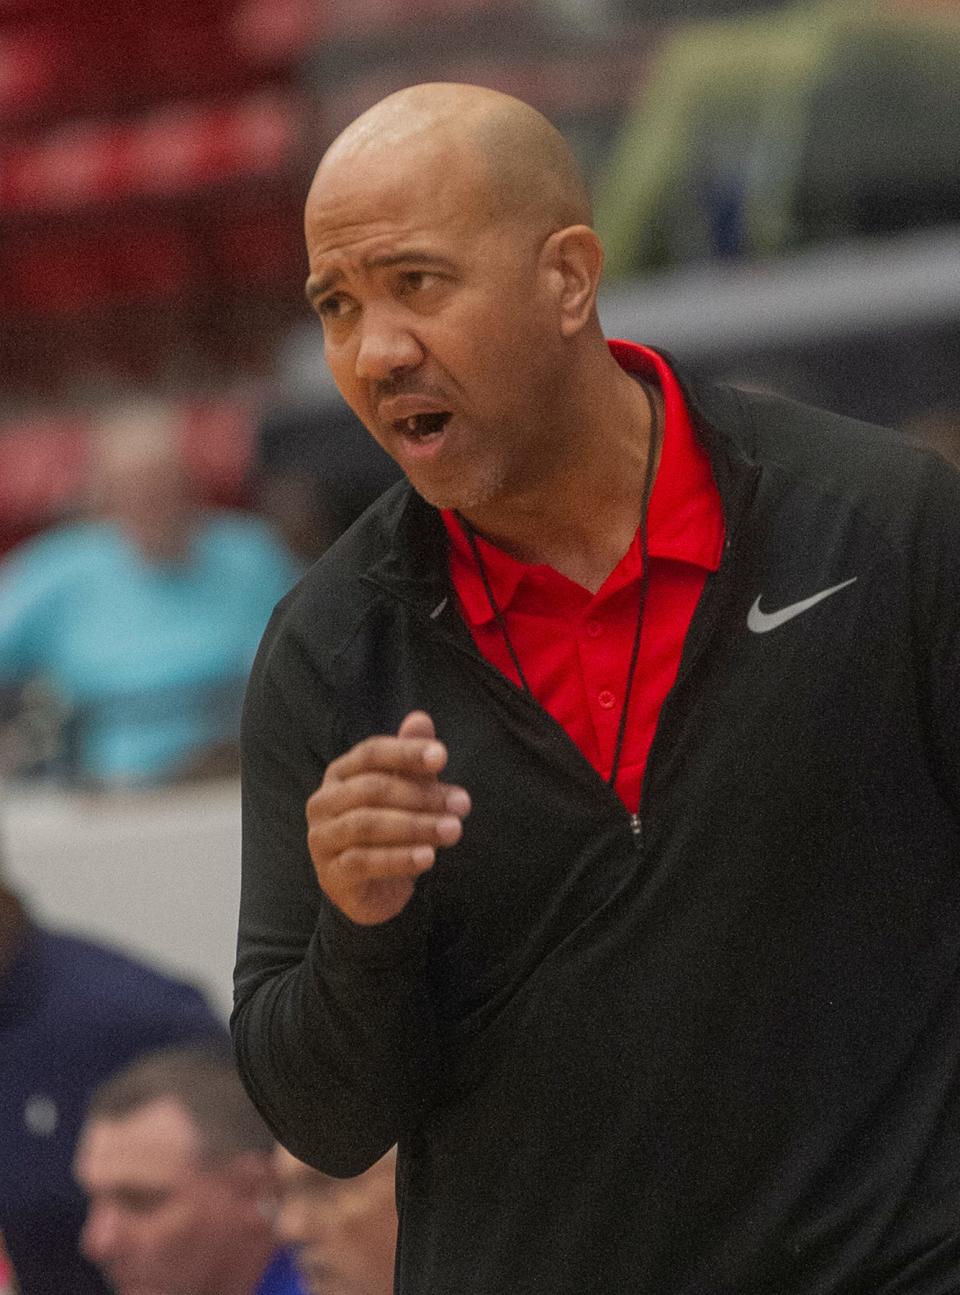 Cardinal Mooney High School Head Basketball Coach Marlon Williams instructs his players against King's Academy during their FHSAA Girls 3A girls semifinal basketball game at The RP Funding Center in Lakeland Wednesday. February 22, 2023. (SPECIAL TO THE PALM BEACH POST/MICHAEL WILSON)